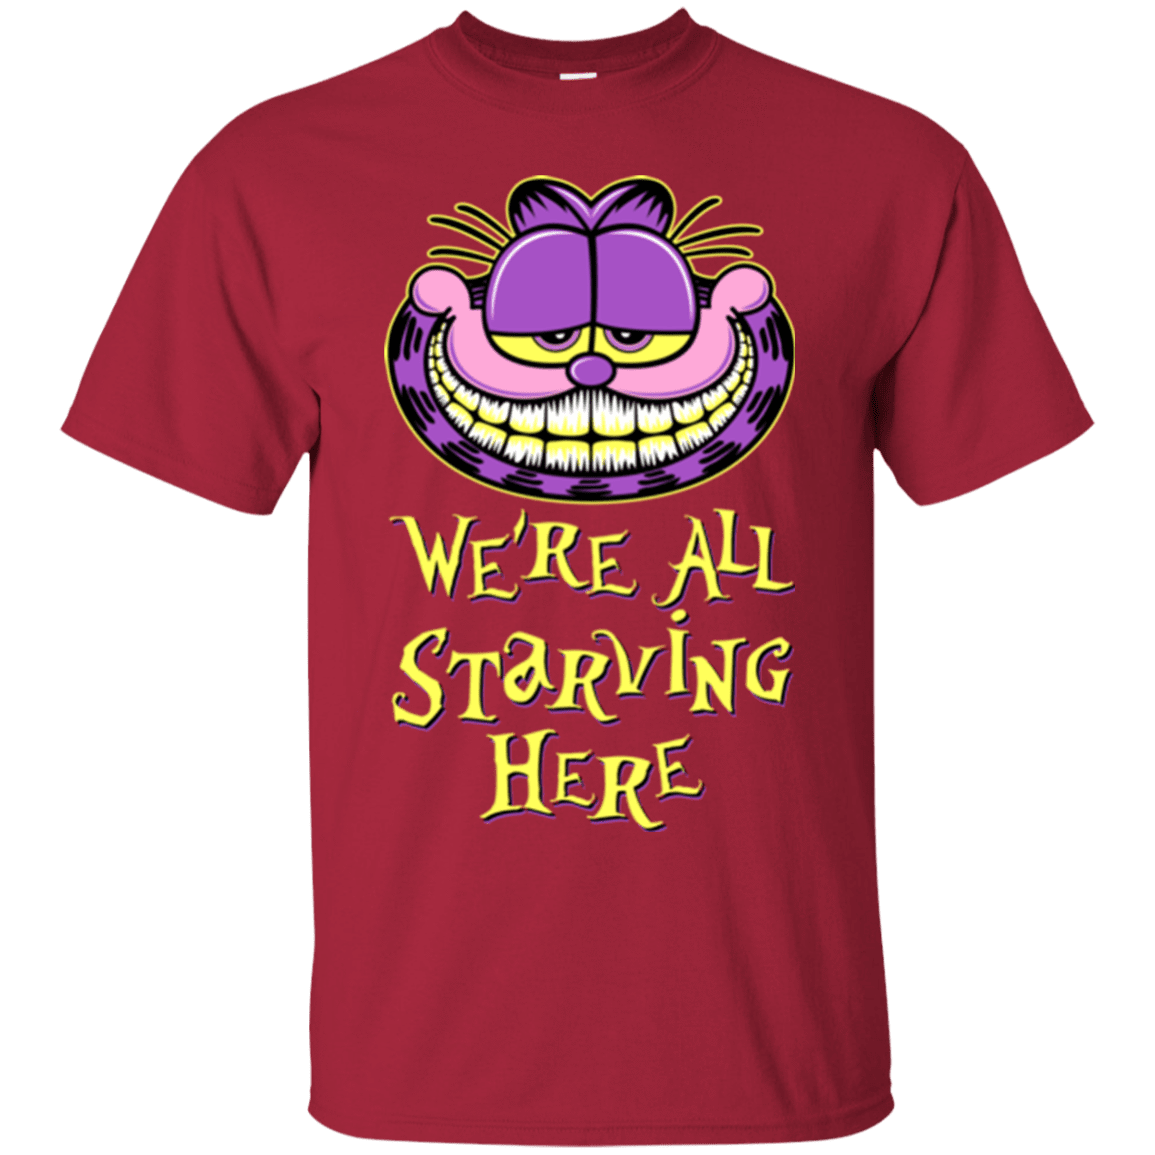 T-Shirts Cardinal / Small We're all starving T-Shirt